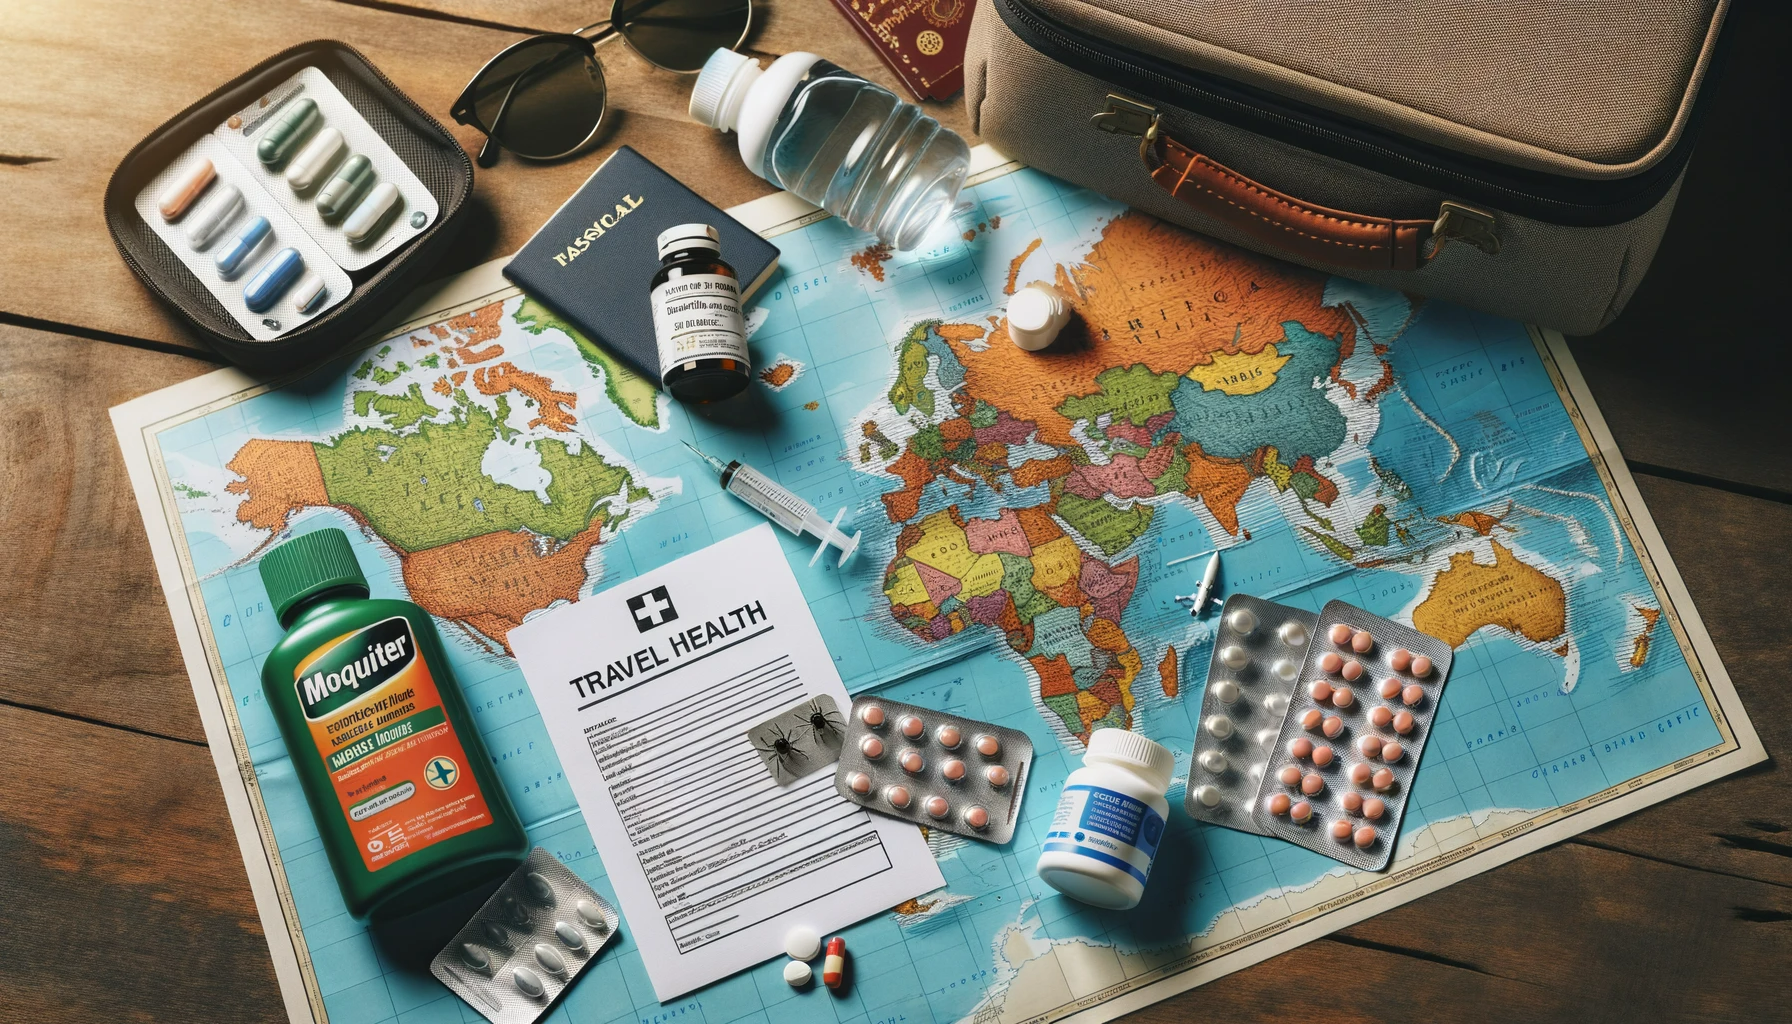 8 Common Travel Health Mistakes and How to Avoid Them